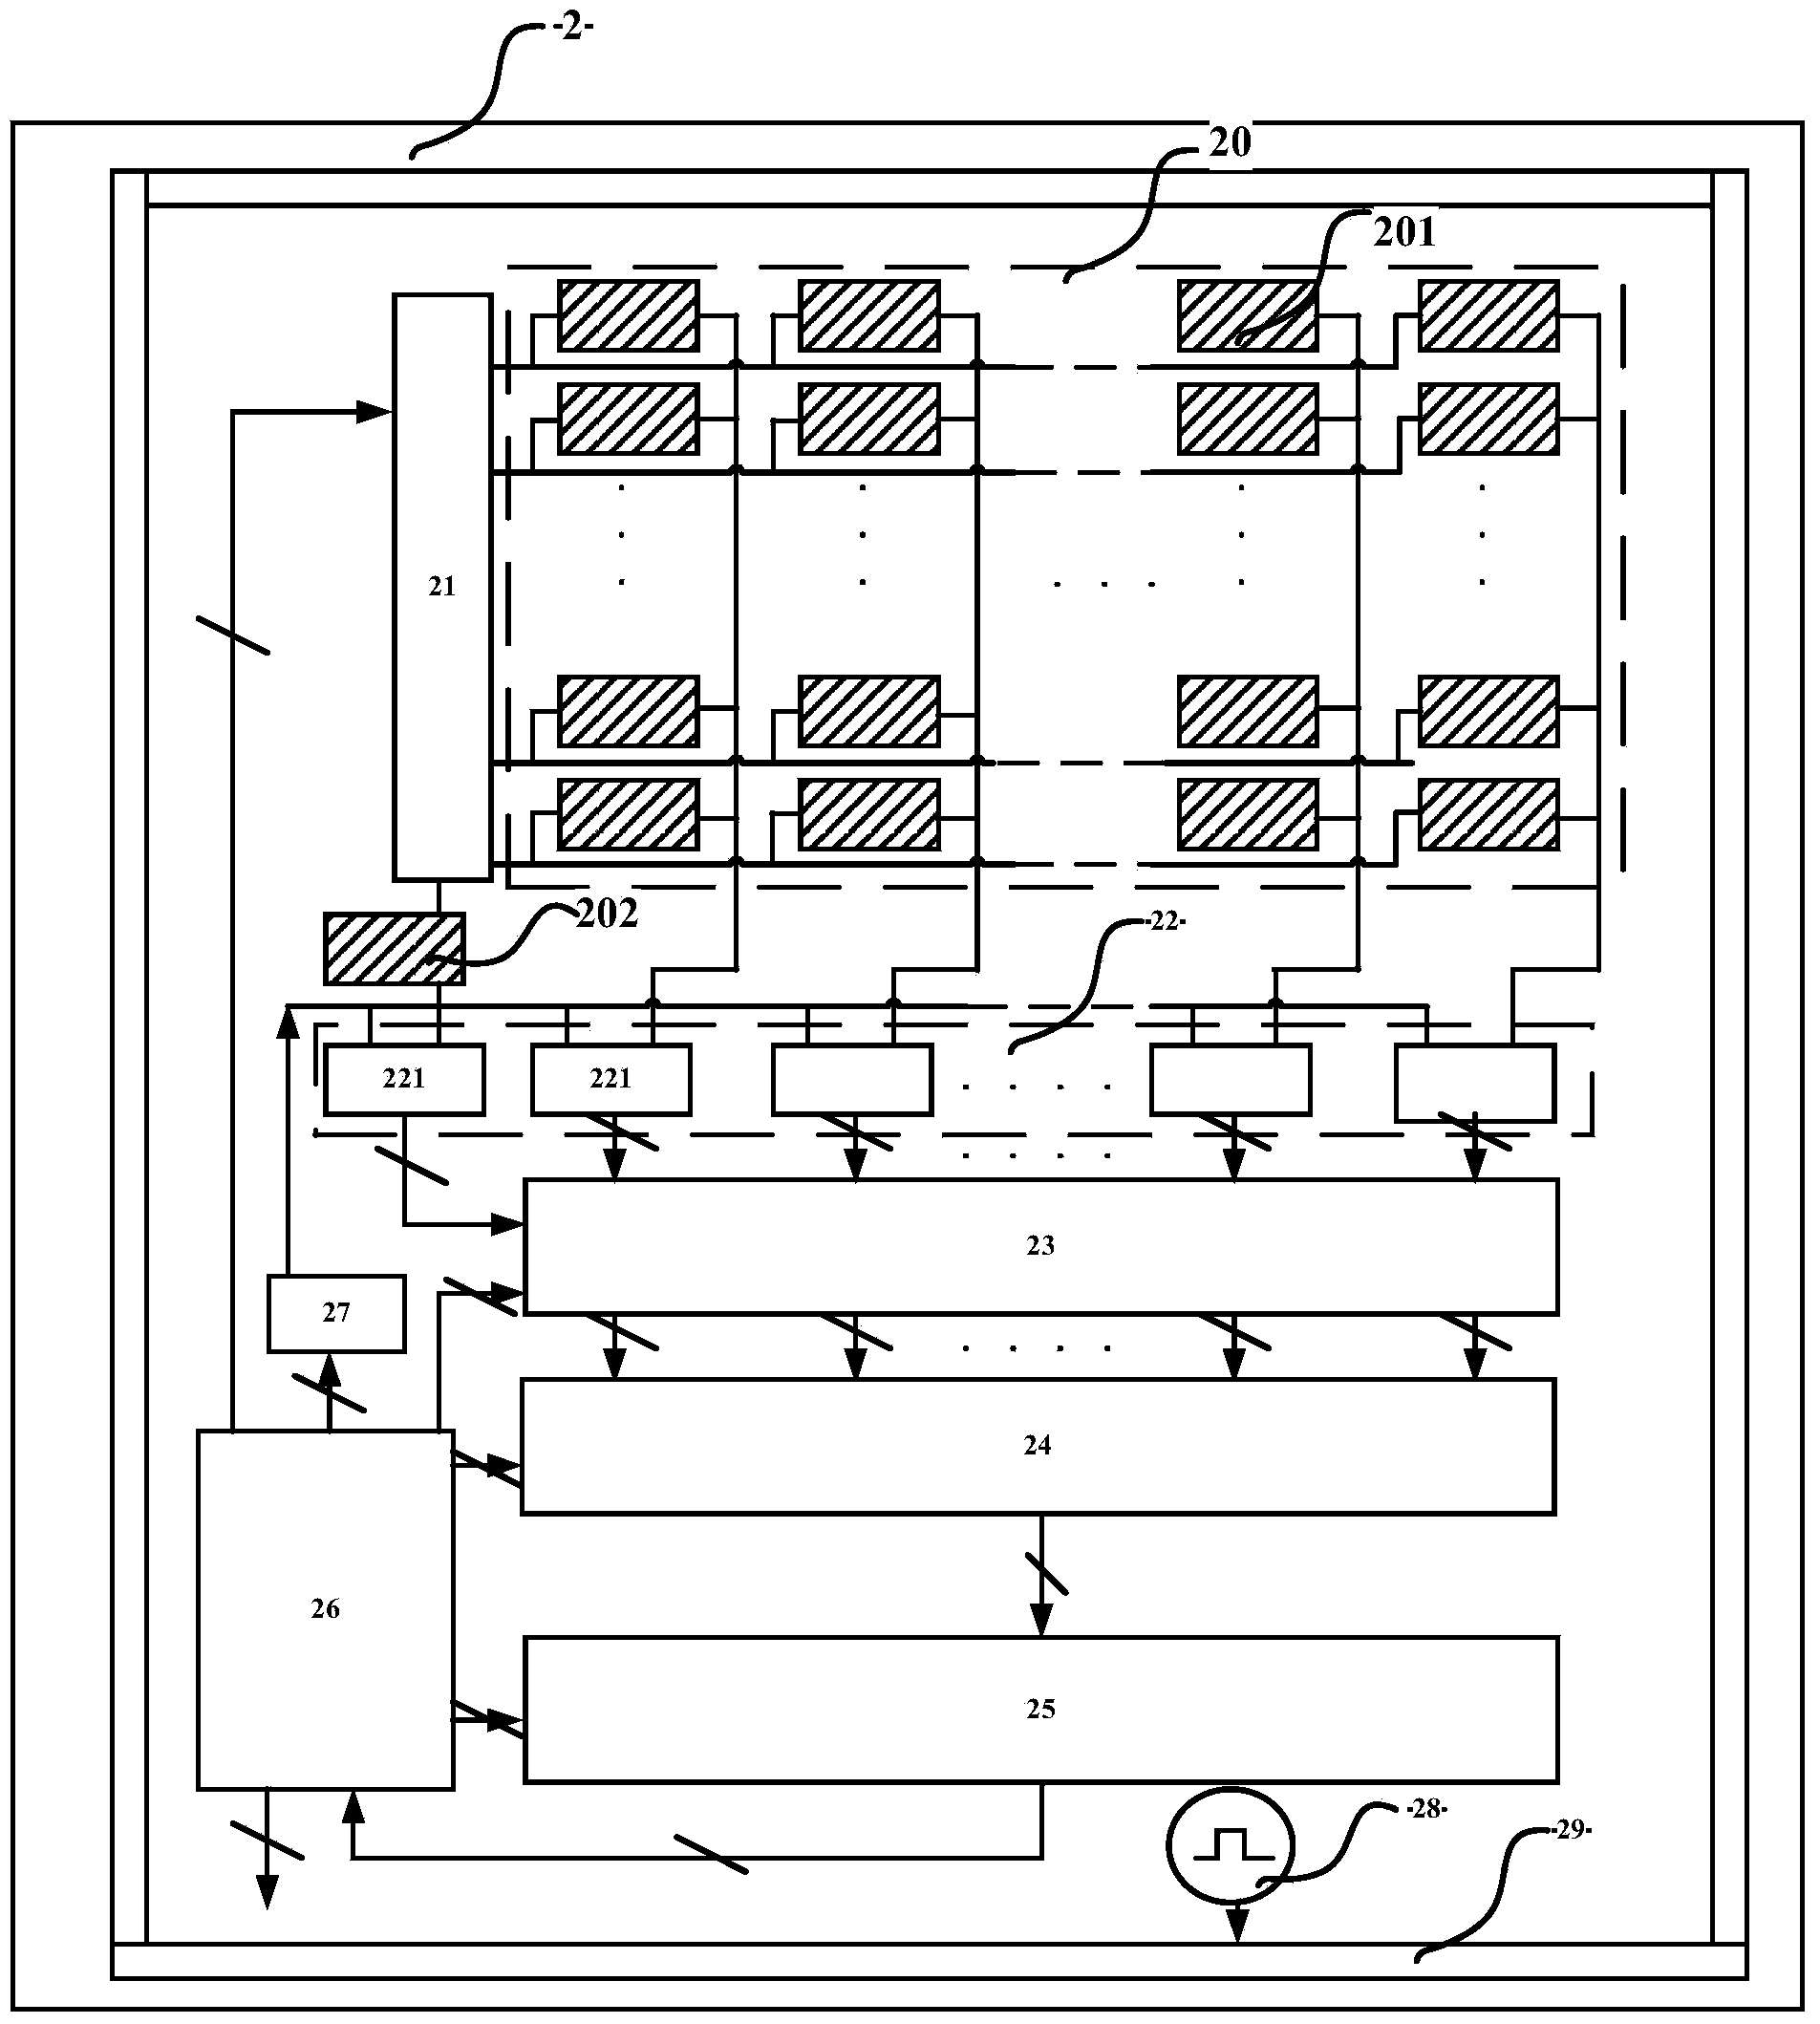 Radio-frequency micro-capacitance fingerprint acquisition chip and method